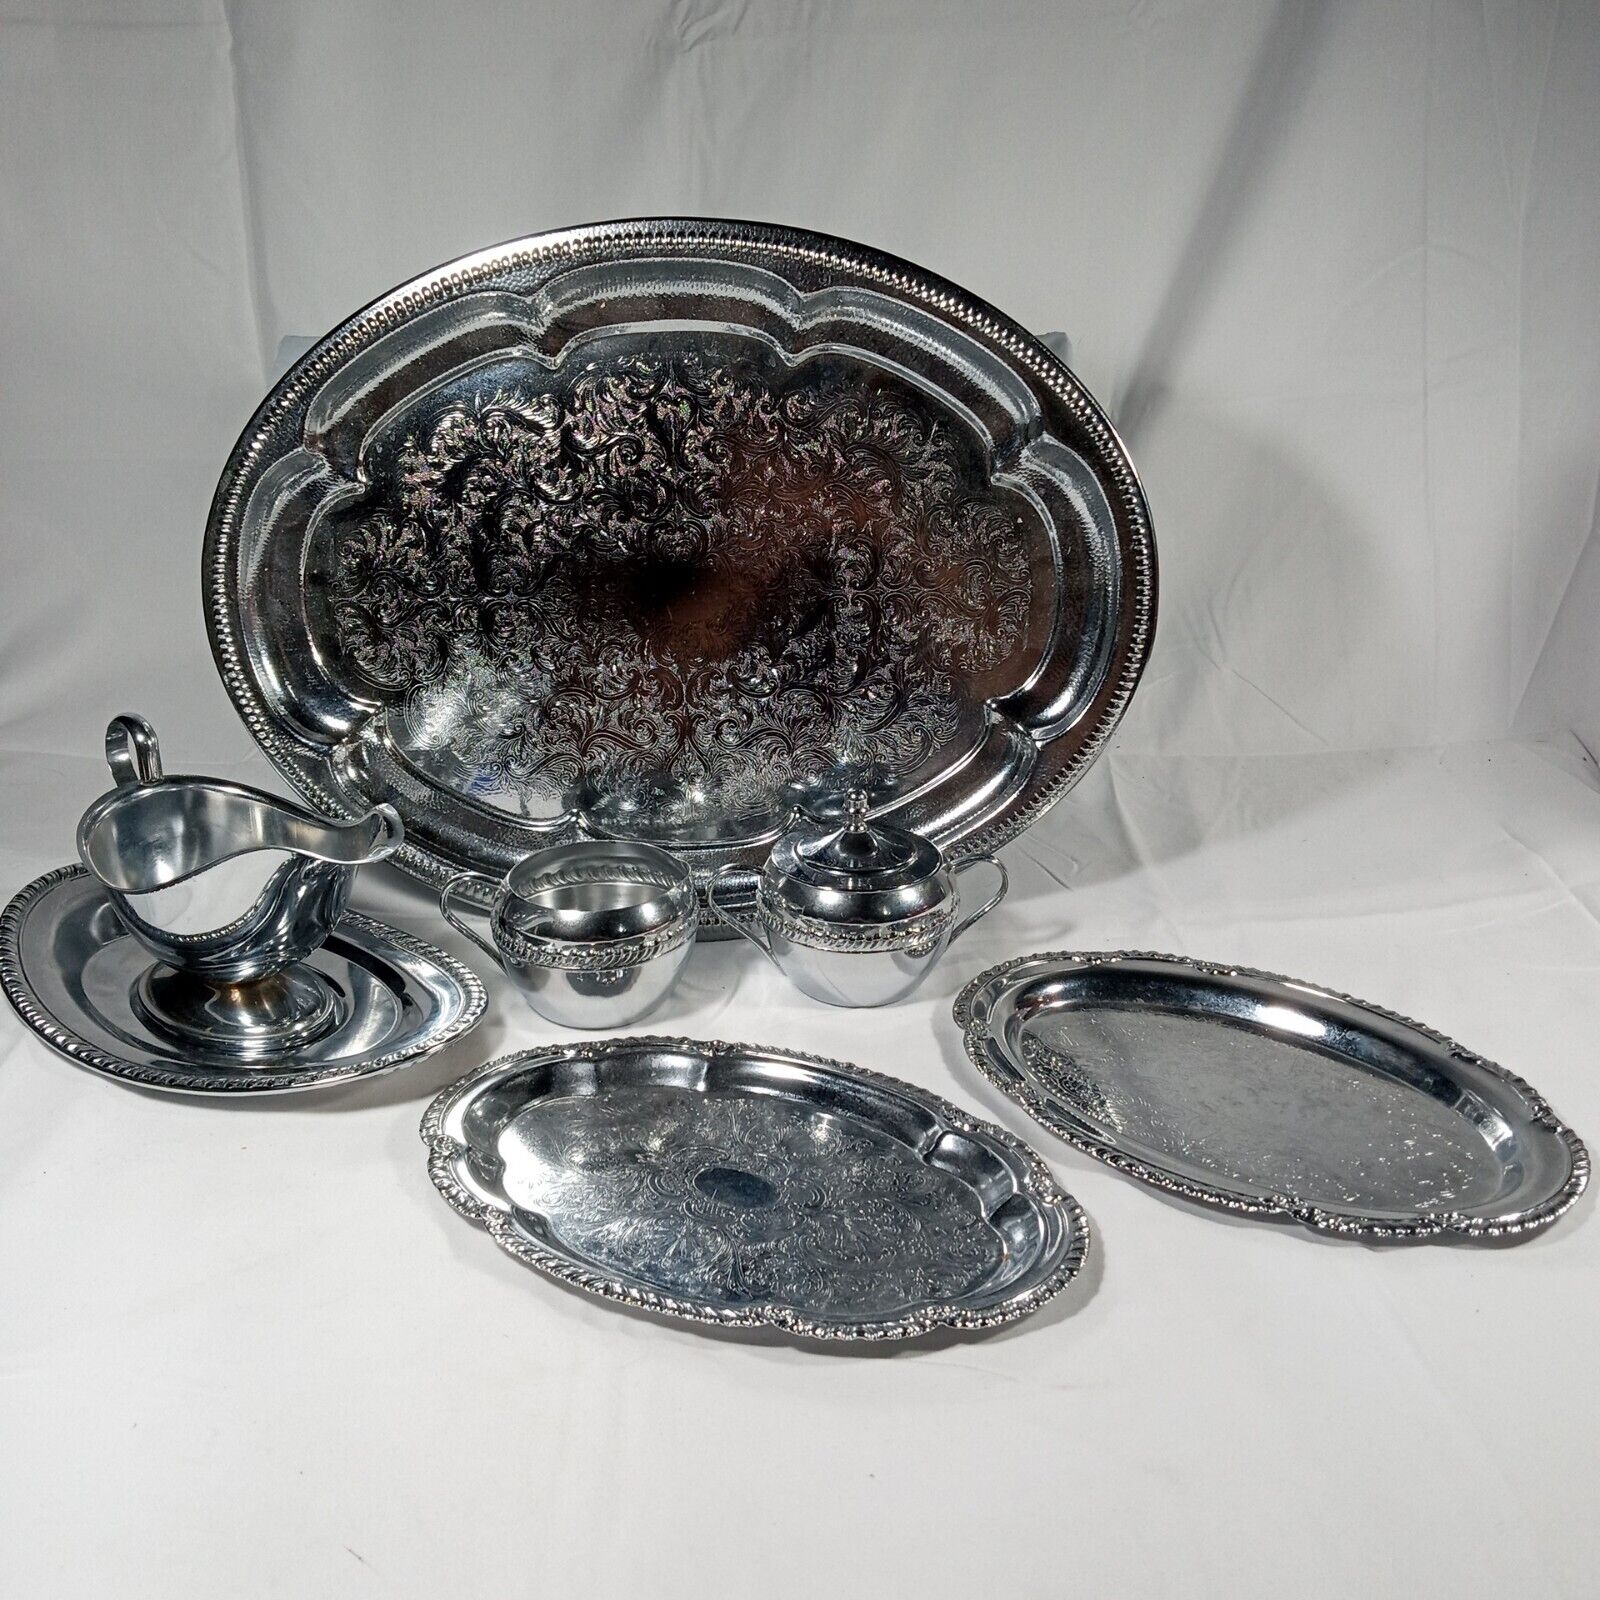 Vintage 1970’s Irvinware 8 Piece Silver Plated Etched Serving Trays Boat Cup Set